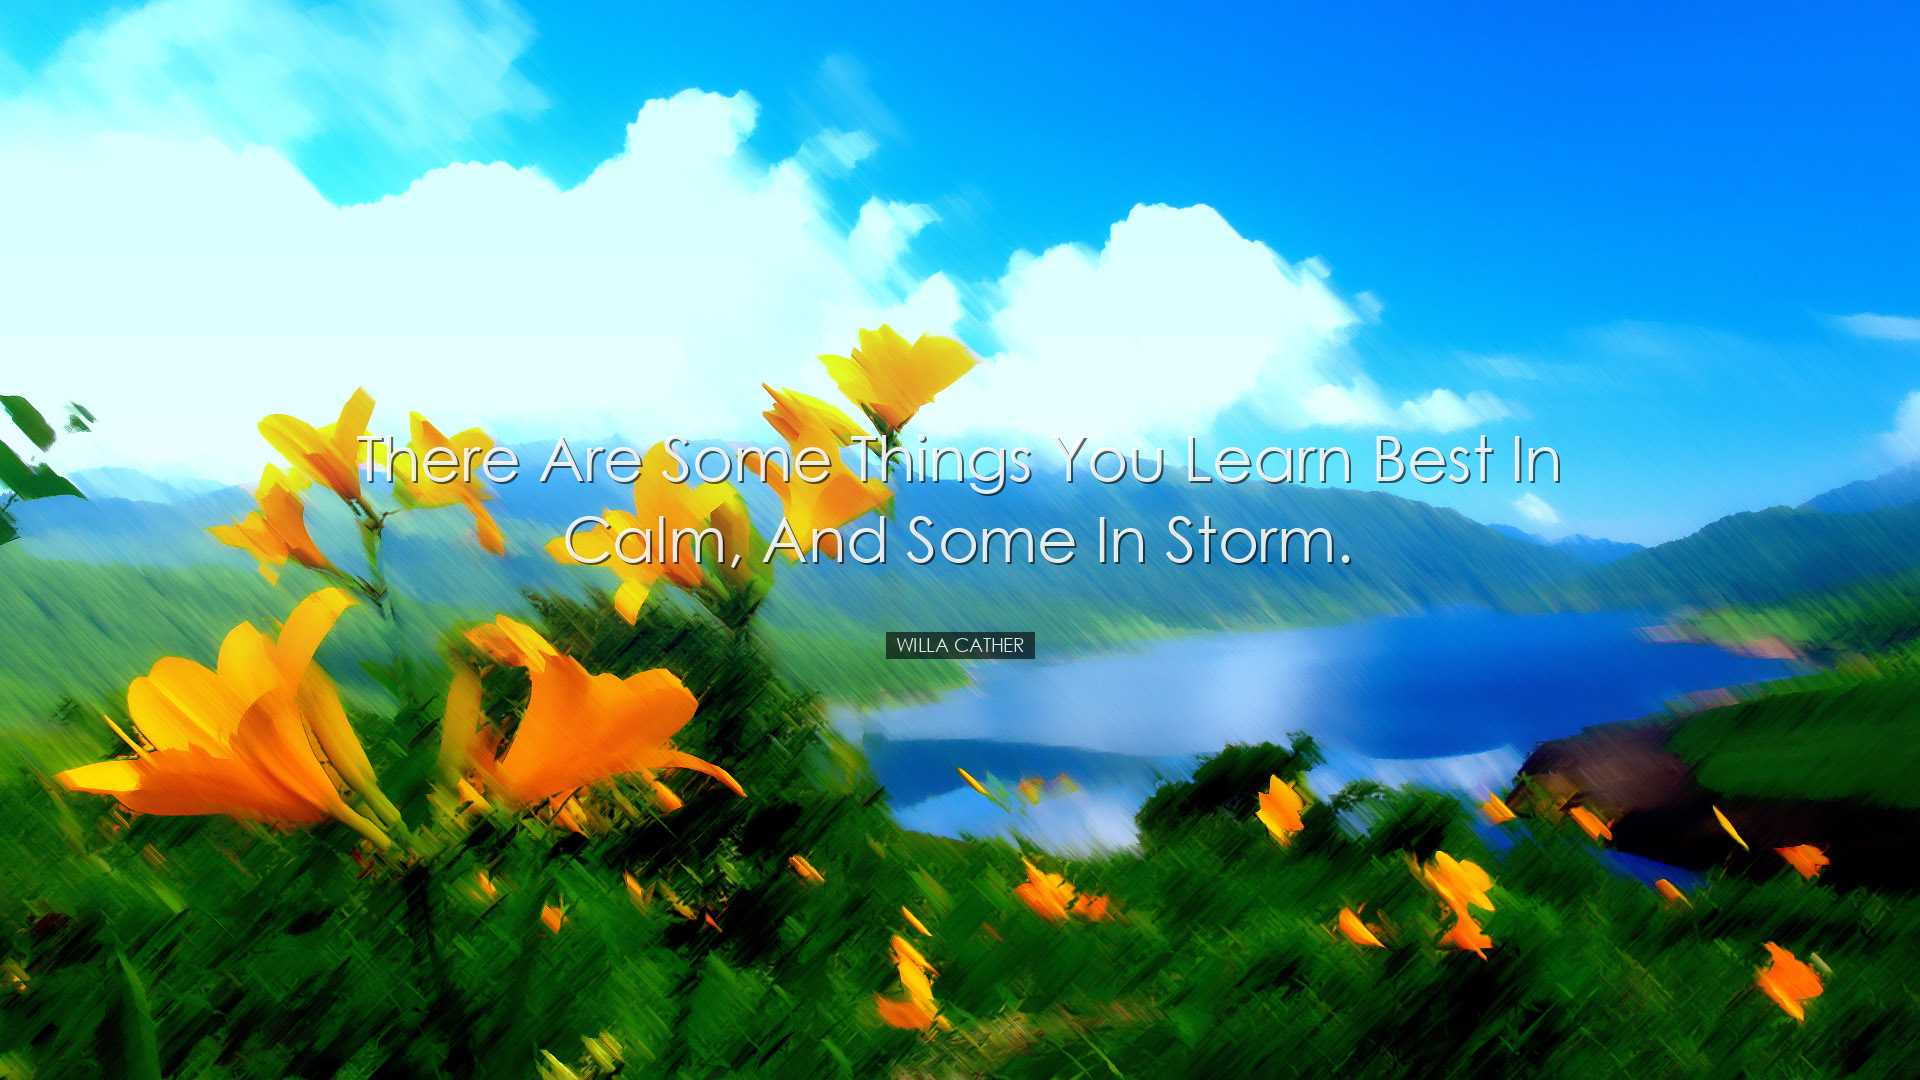 There are some things you learn best in calm, and some in storm. -